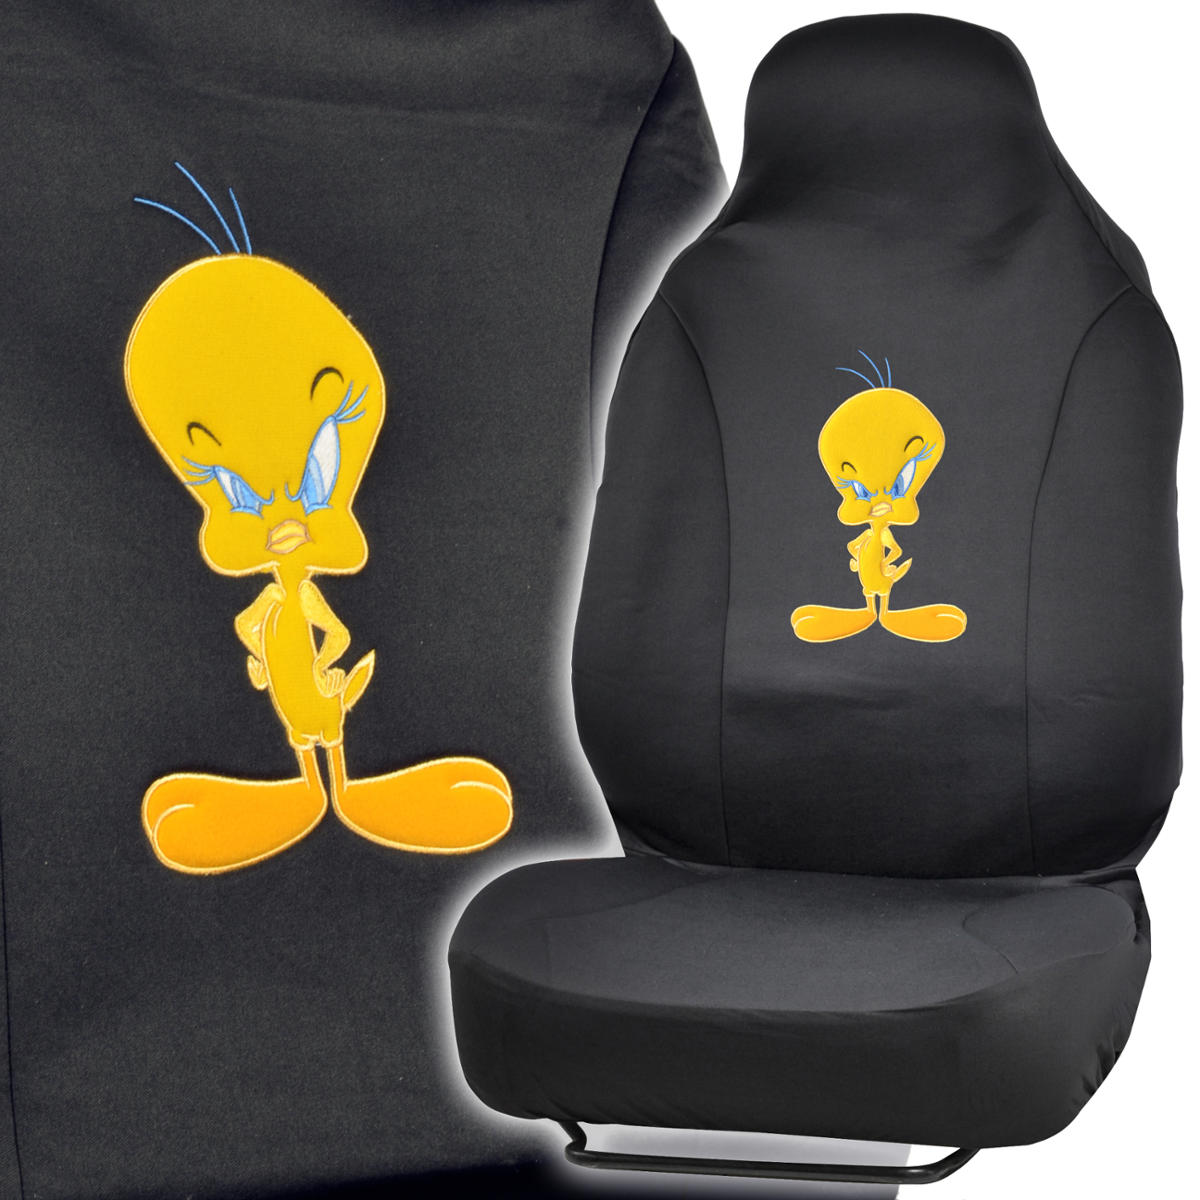 Sassy Tweety Bird Front Car Seat Covers for High-Back Bucket Seats (2pc) - Black/ Yellow